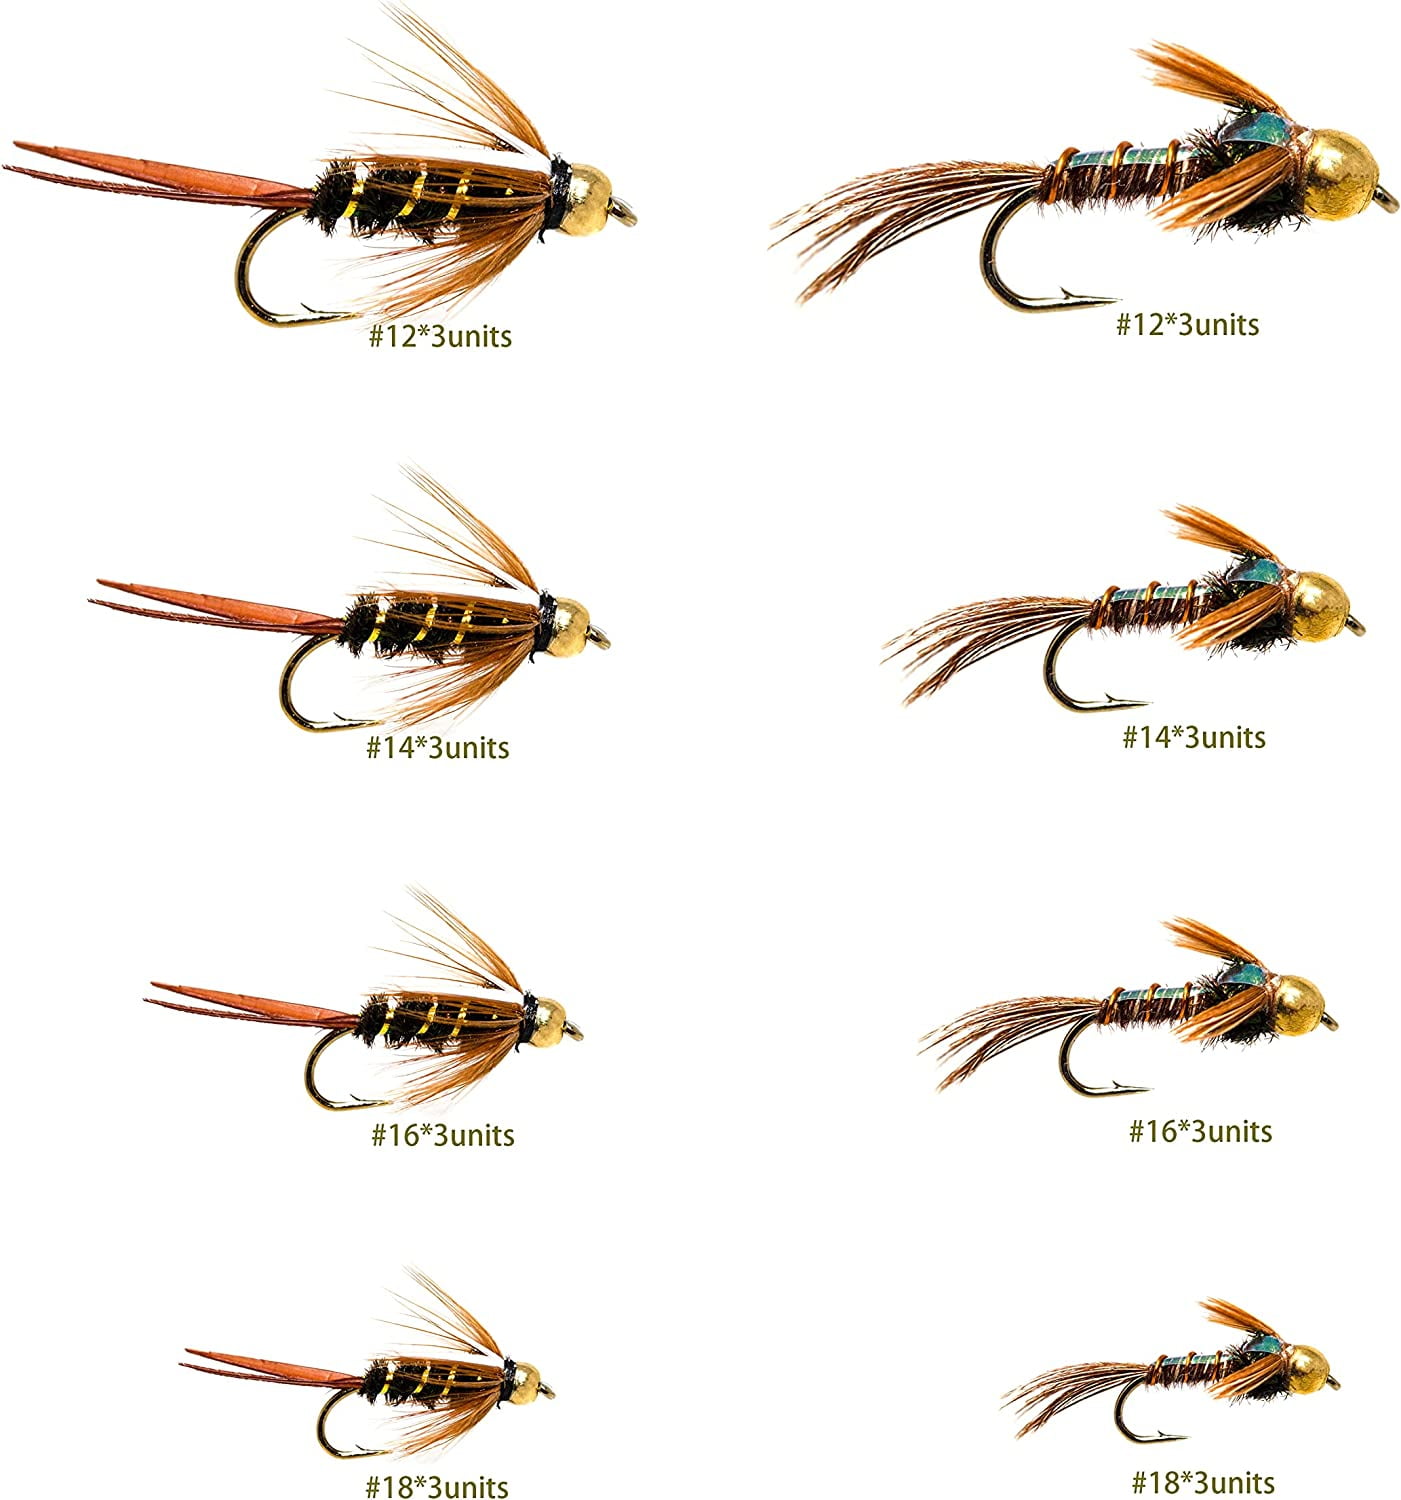 24 Realistic Caddis Dry Fly Fishing Assortment for Trout Fishing